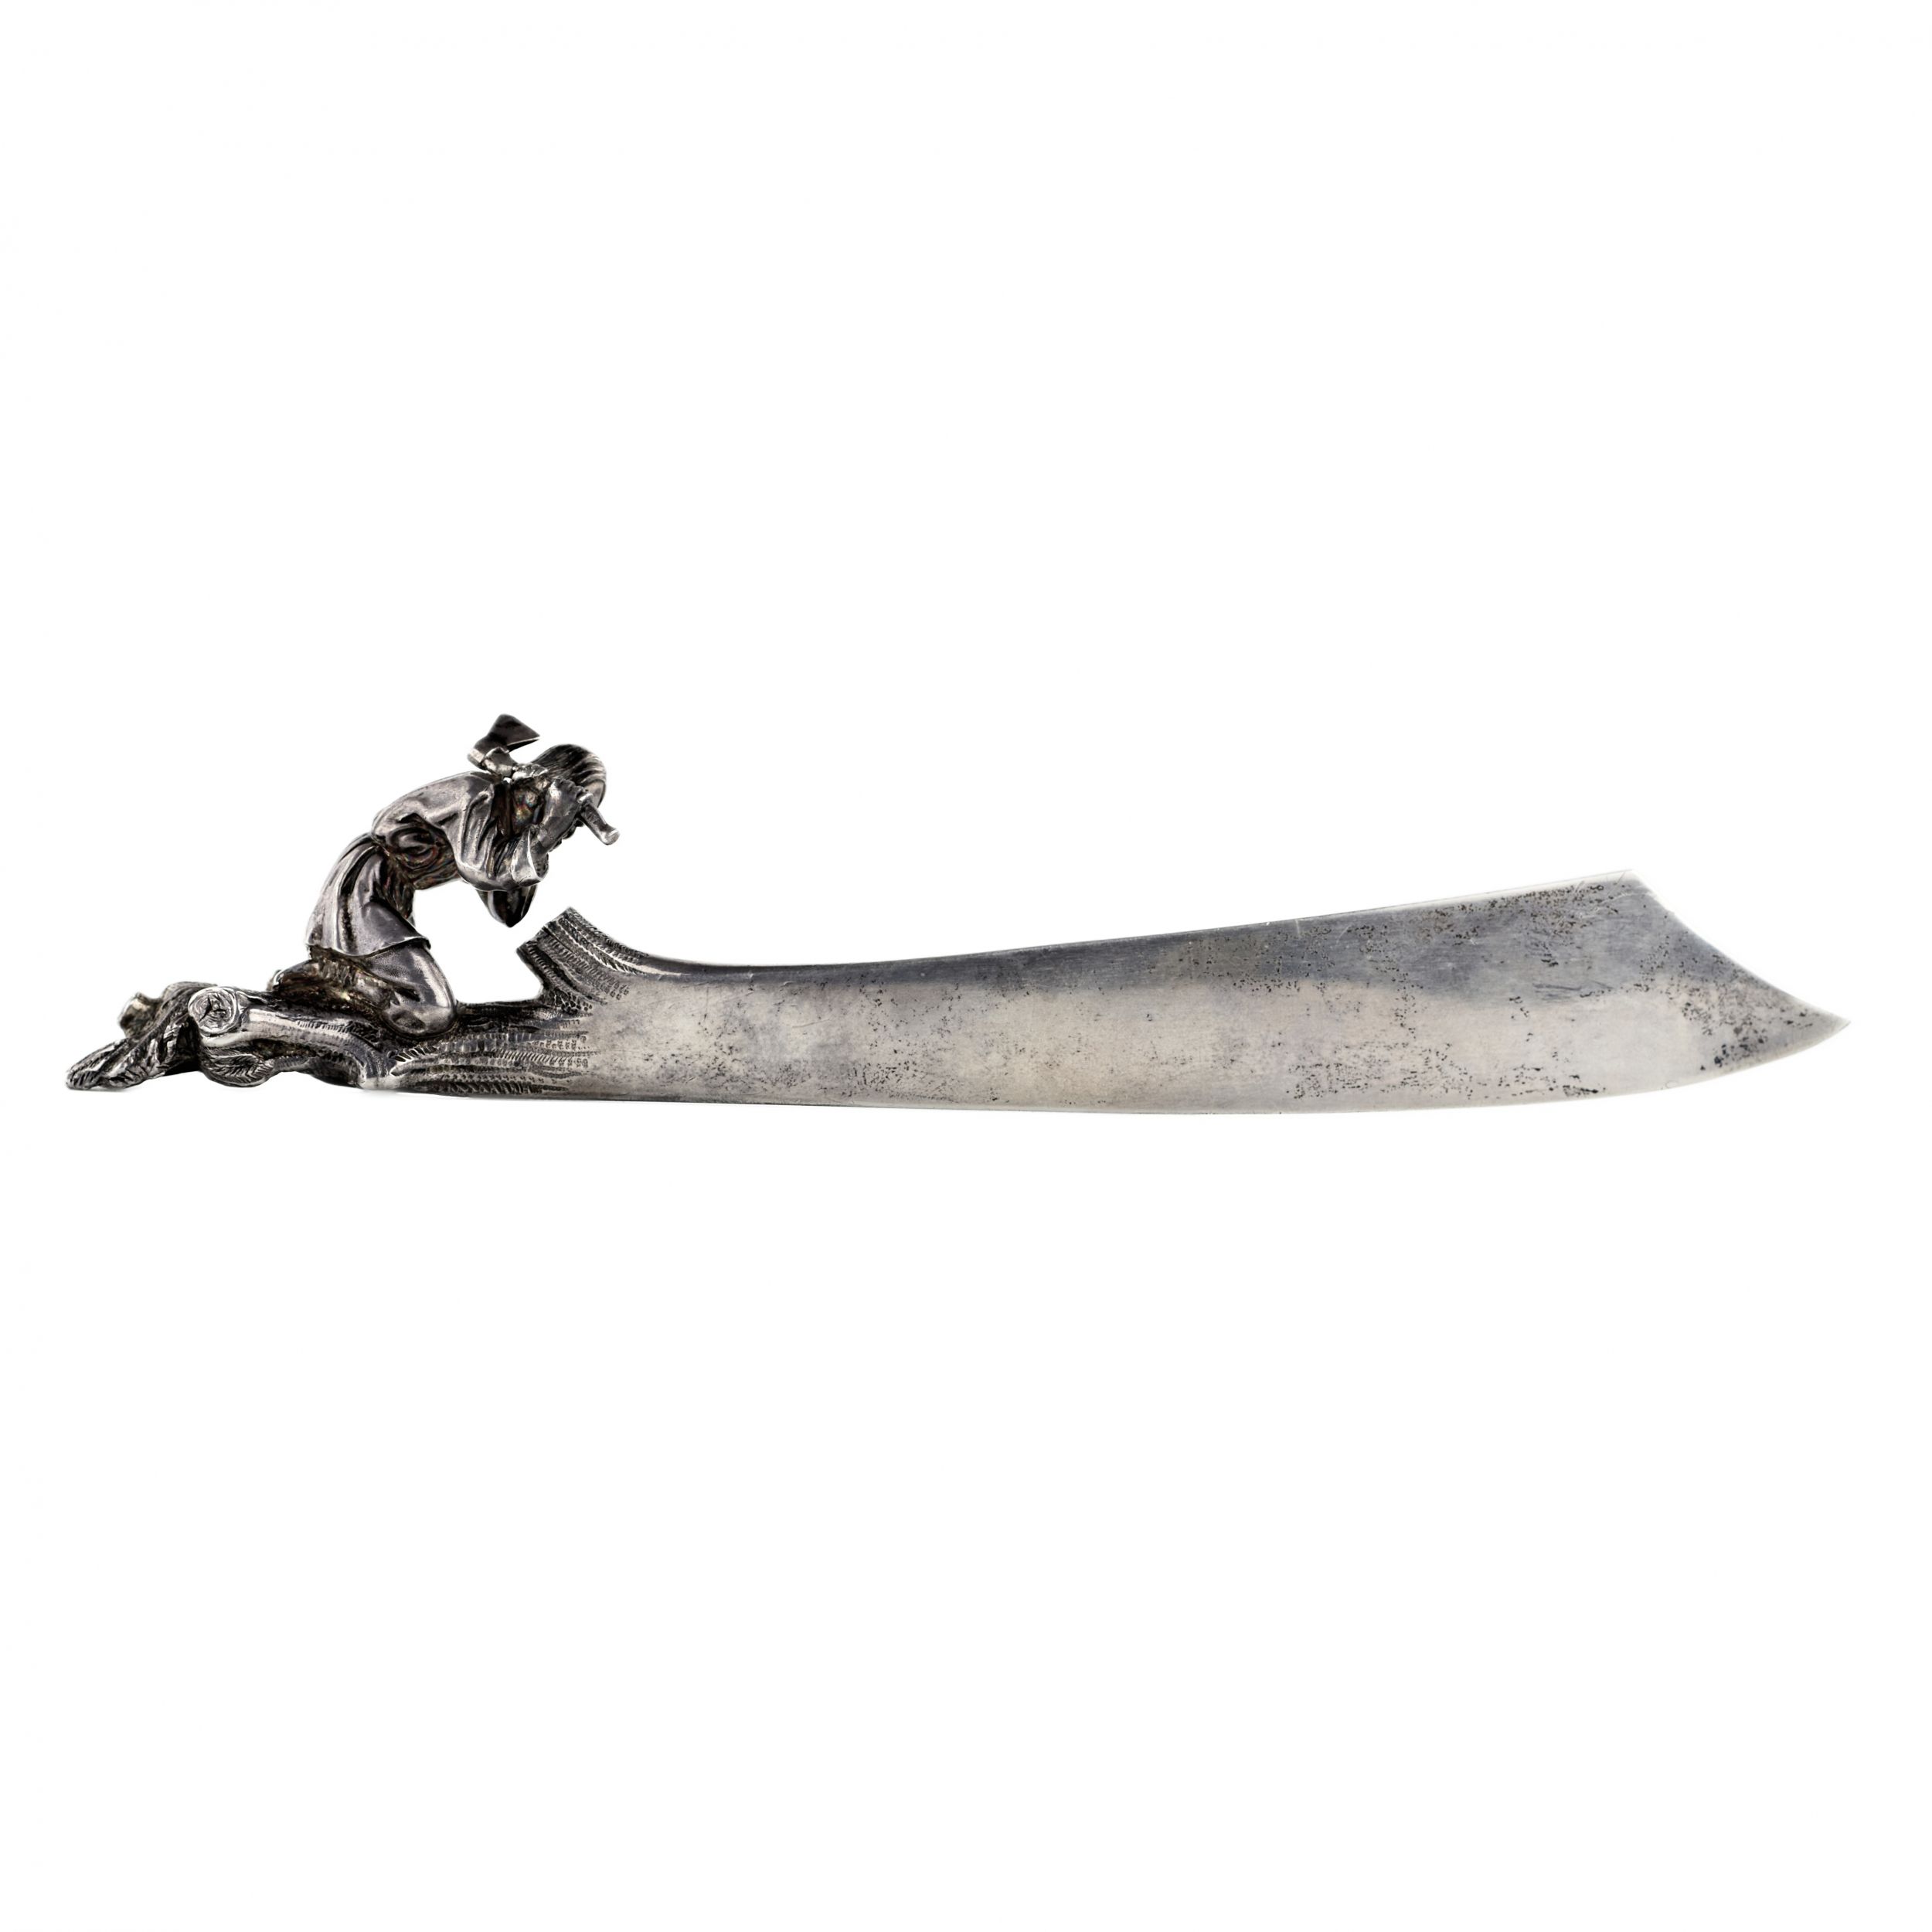 Original-silver-paper-knife-Faberge-firm-last-quarter-of-the-19th-century-